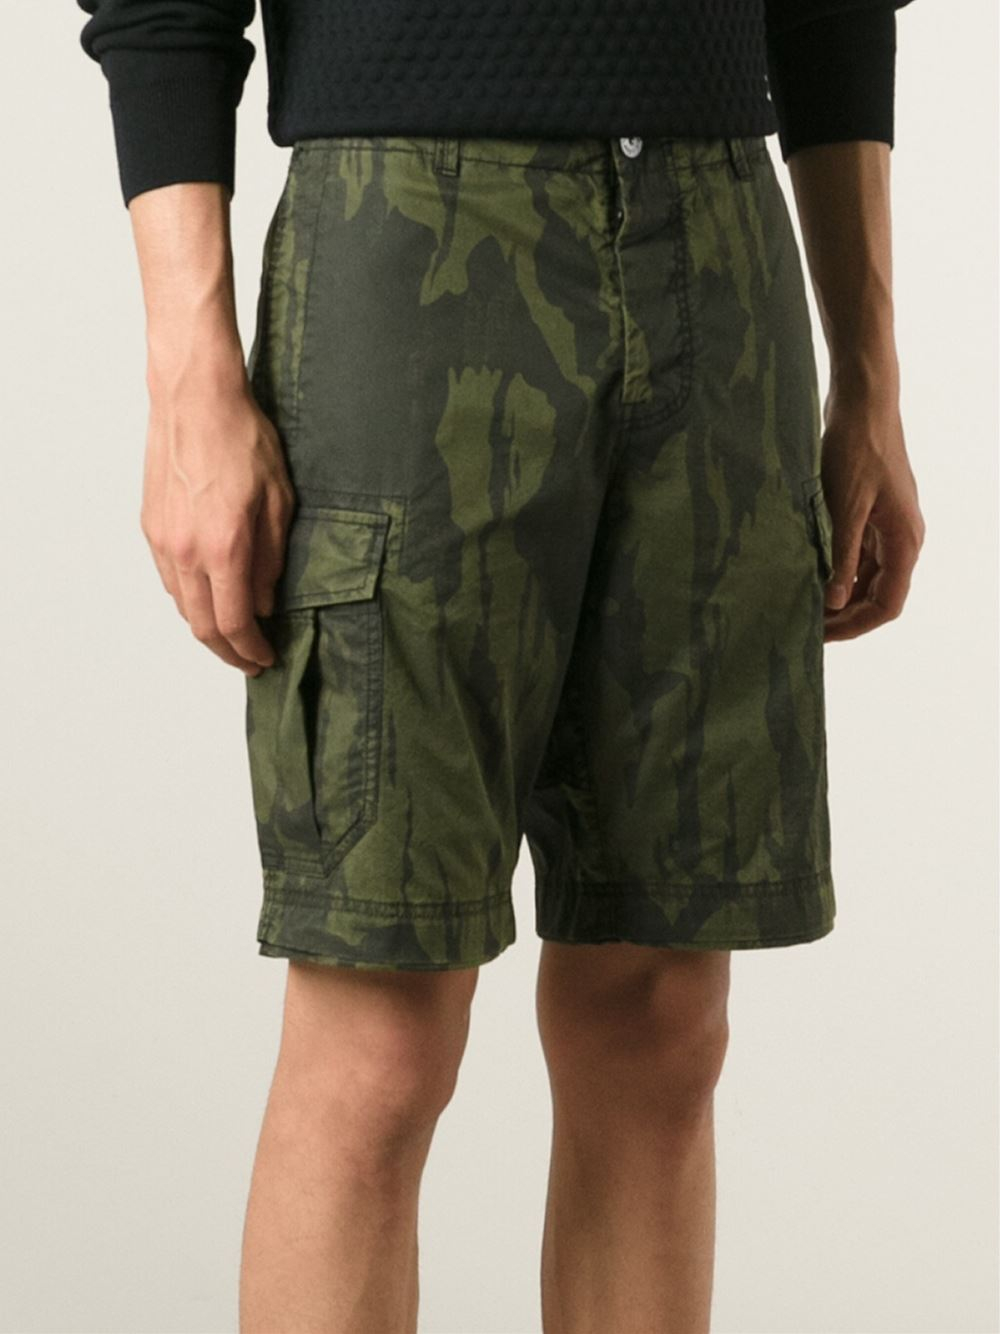 Lyst Stone Island Camouflage Cargo Shorts  in Green for Men